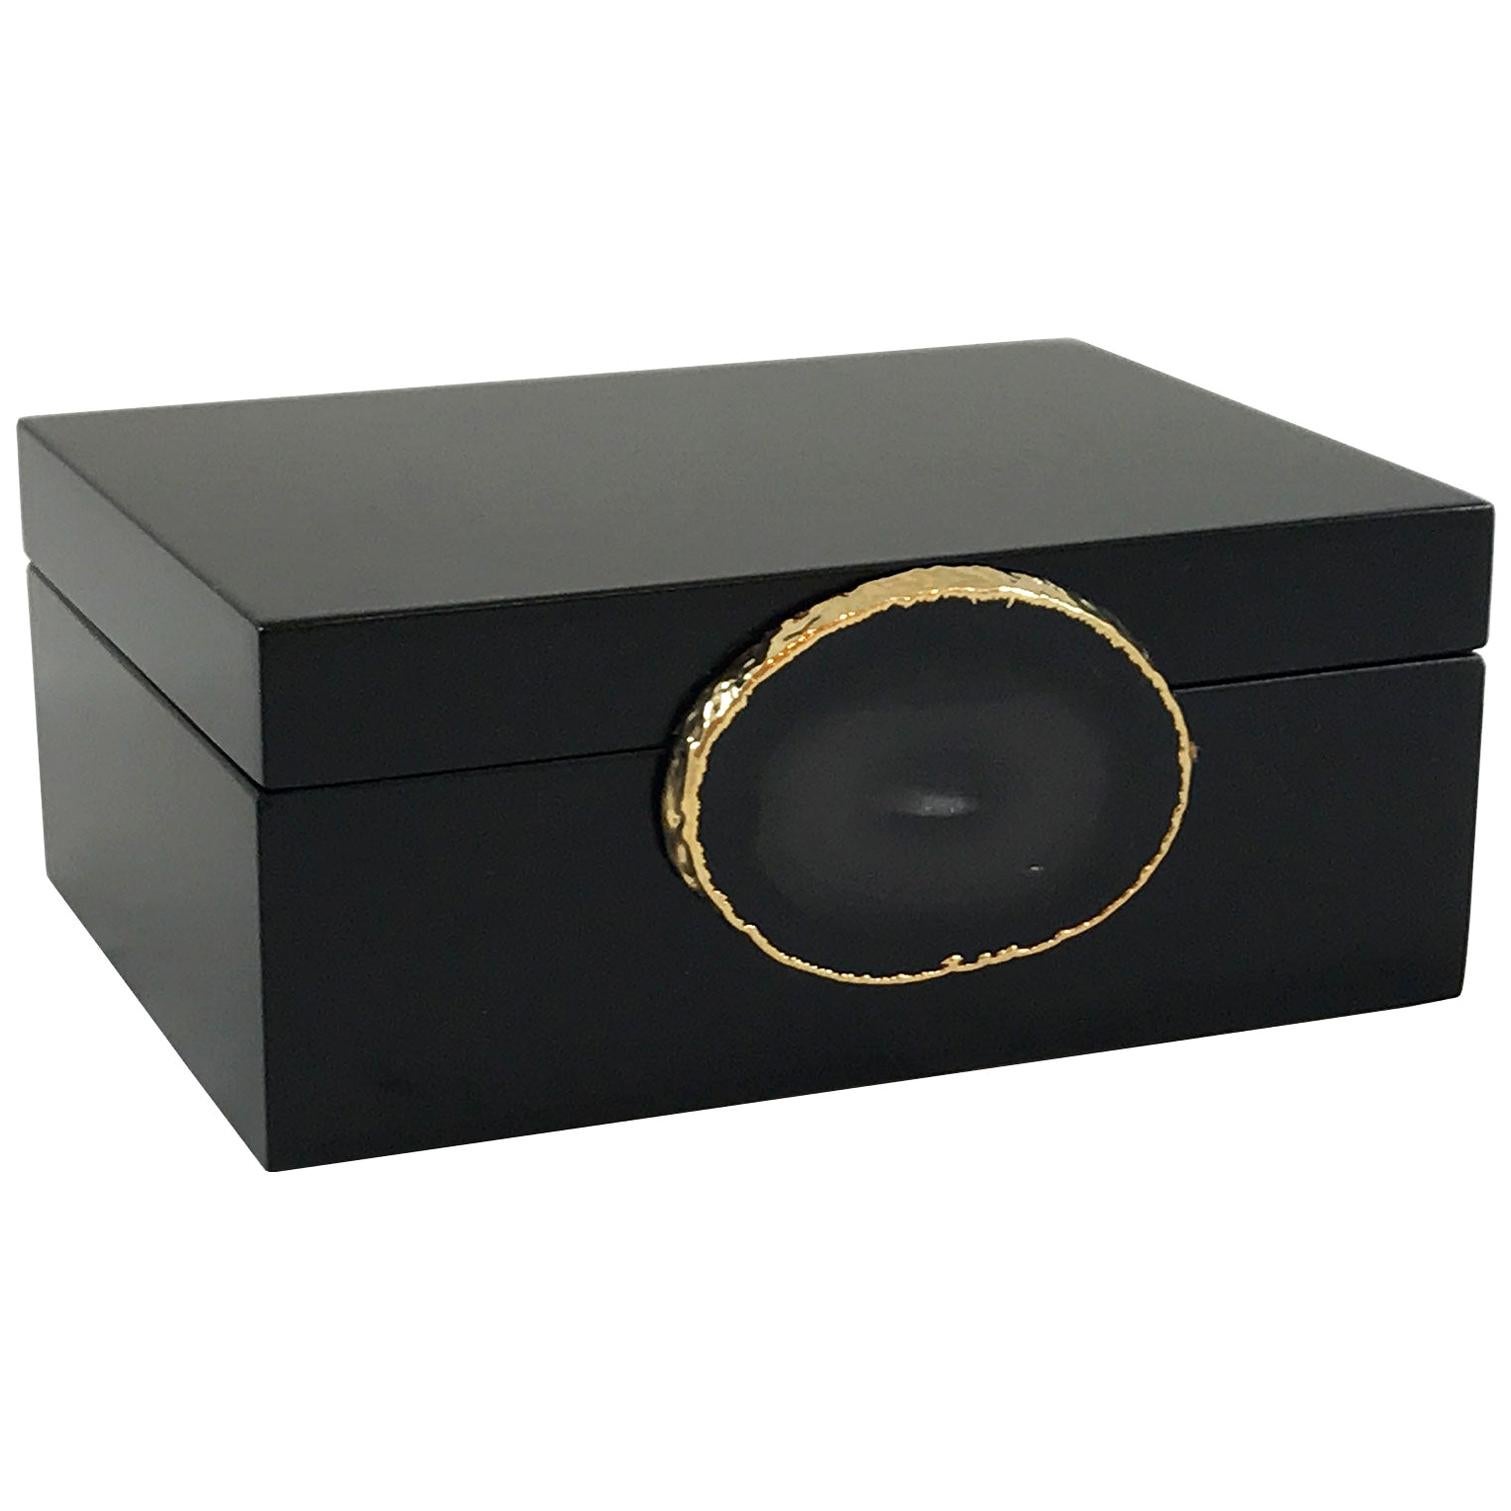 Guilherme Small Agate Box in Black and Natural Stone by CuratedKravet